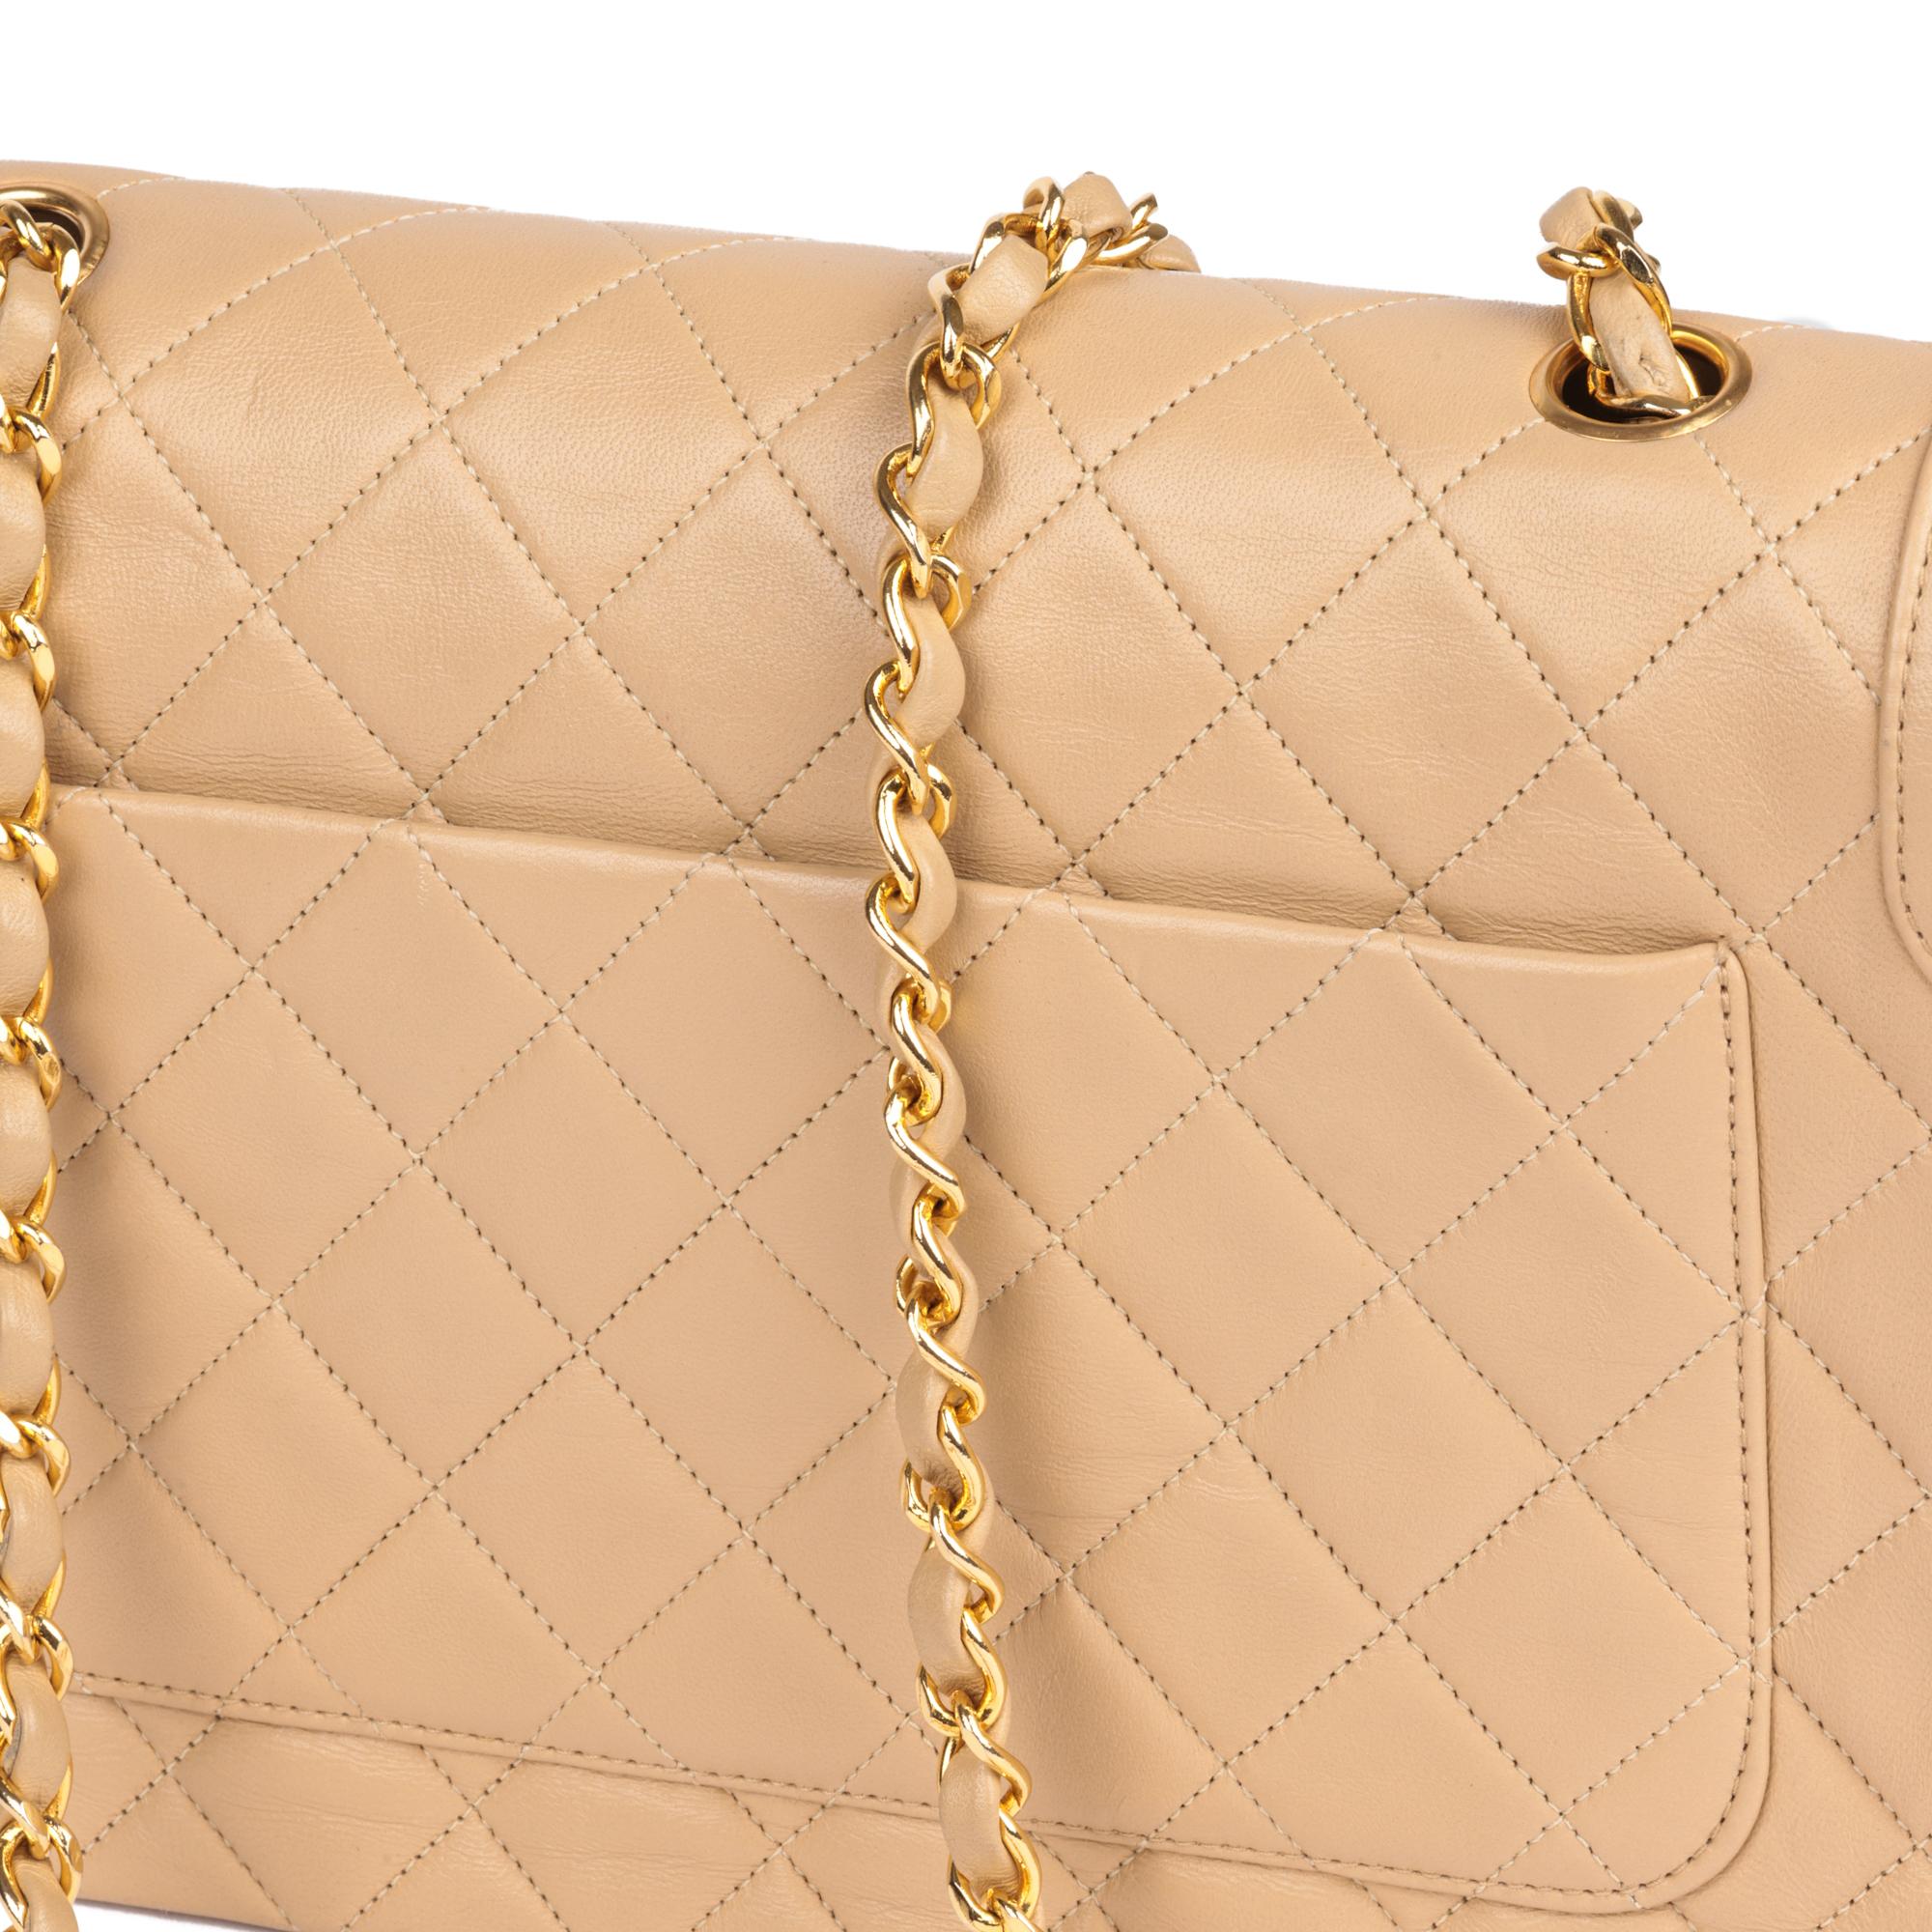 CHANEL Beige Quilted Lambskin Vintage Medium Classic Single Flap Bag with Wallet For Sale 3